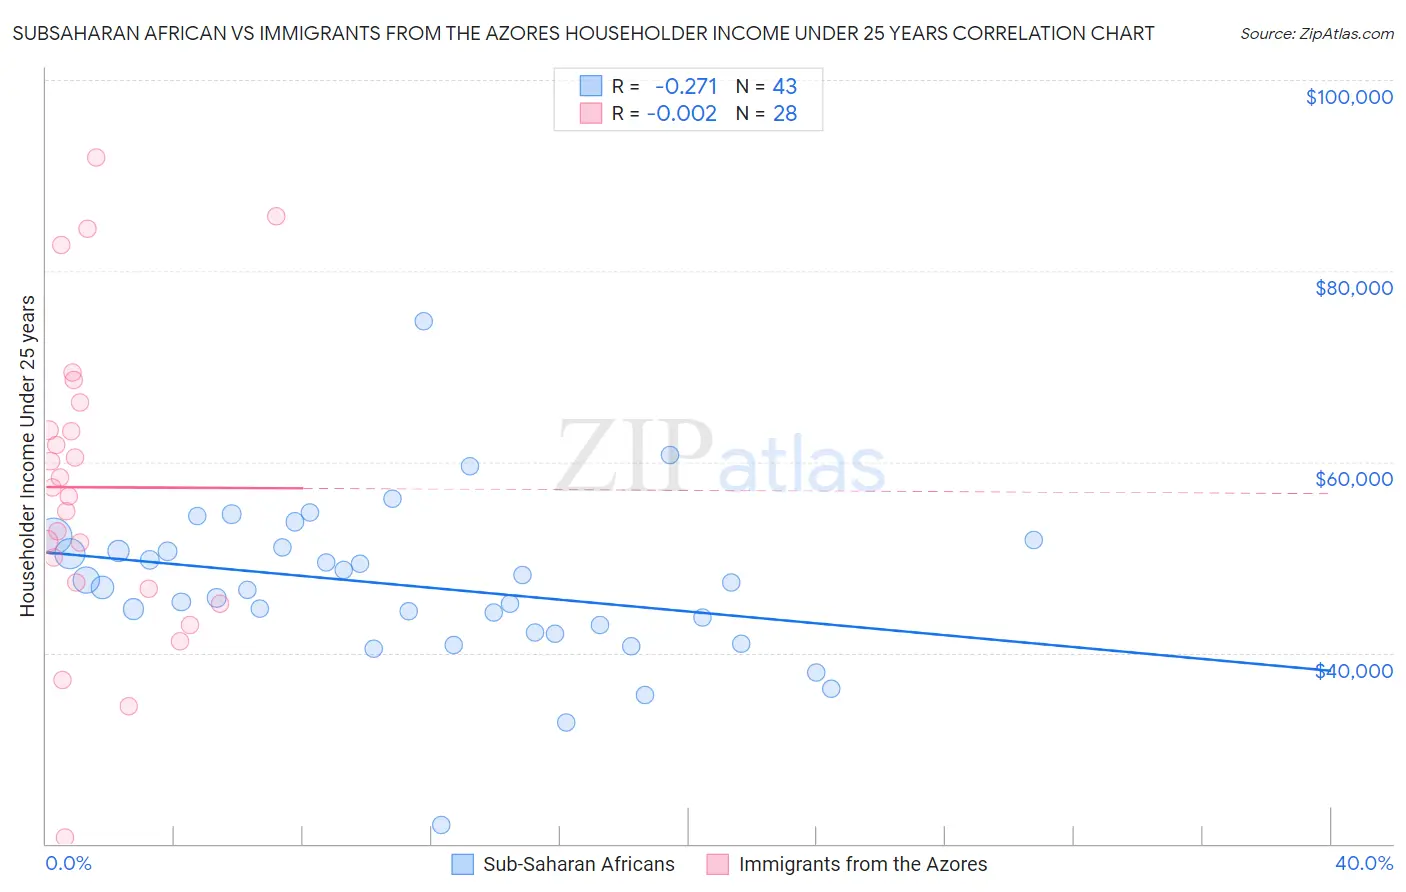 Subsaharan African vs Immigrants from the Azores Householder Income Under 25 years